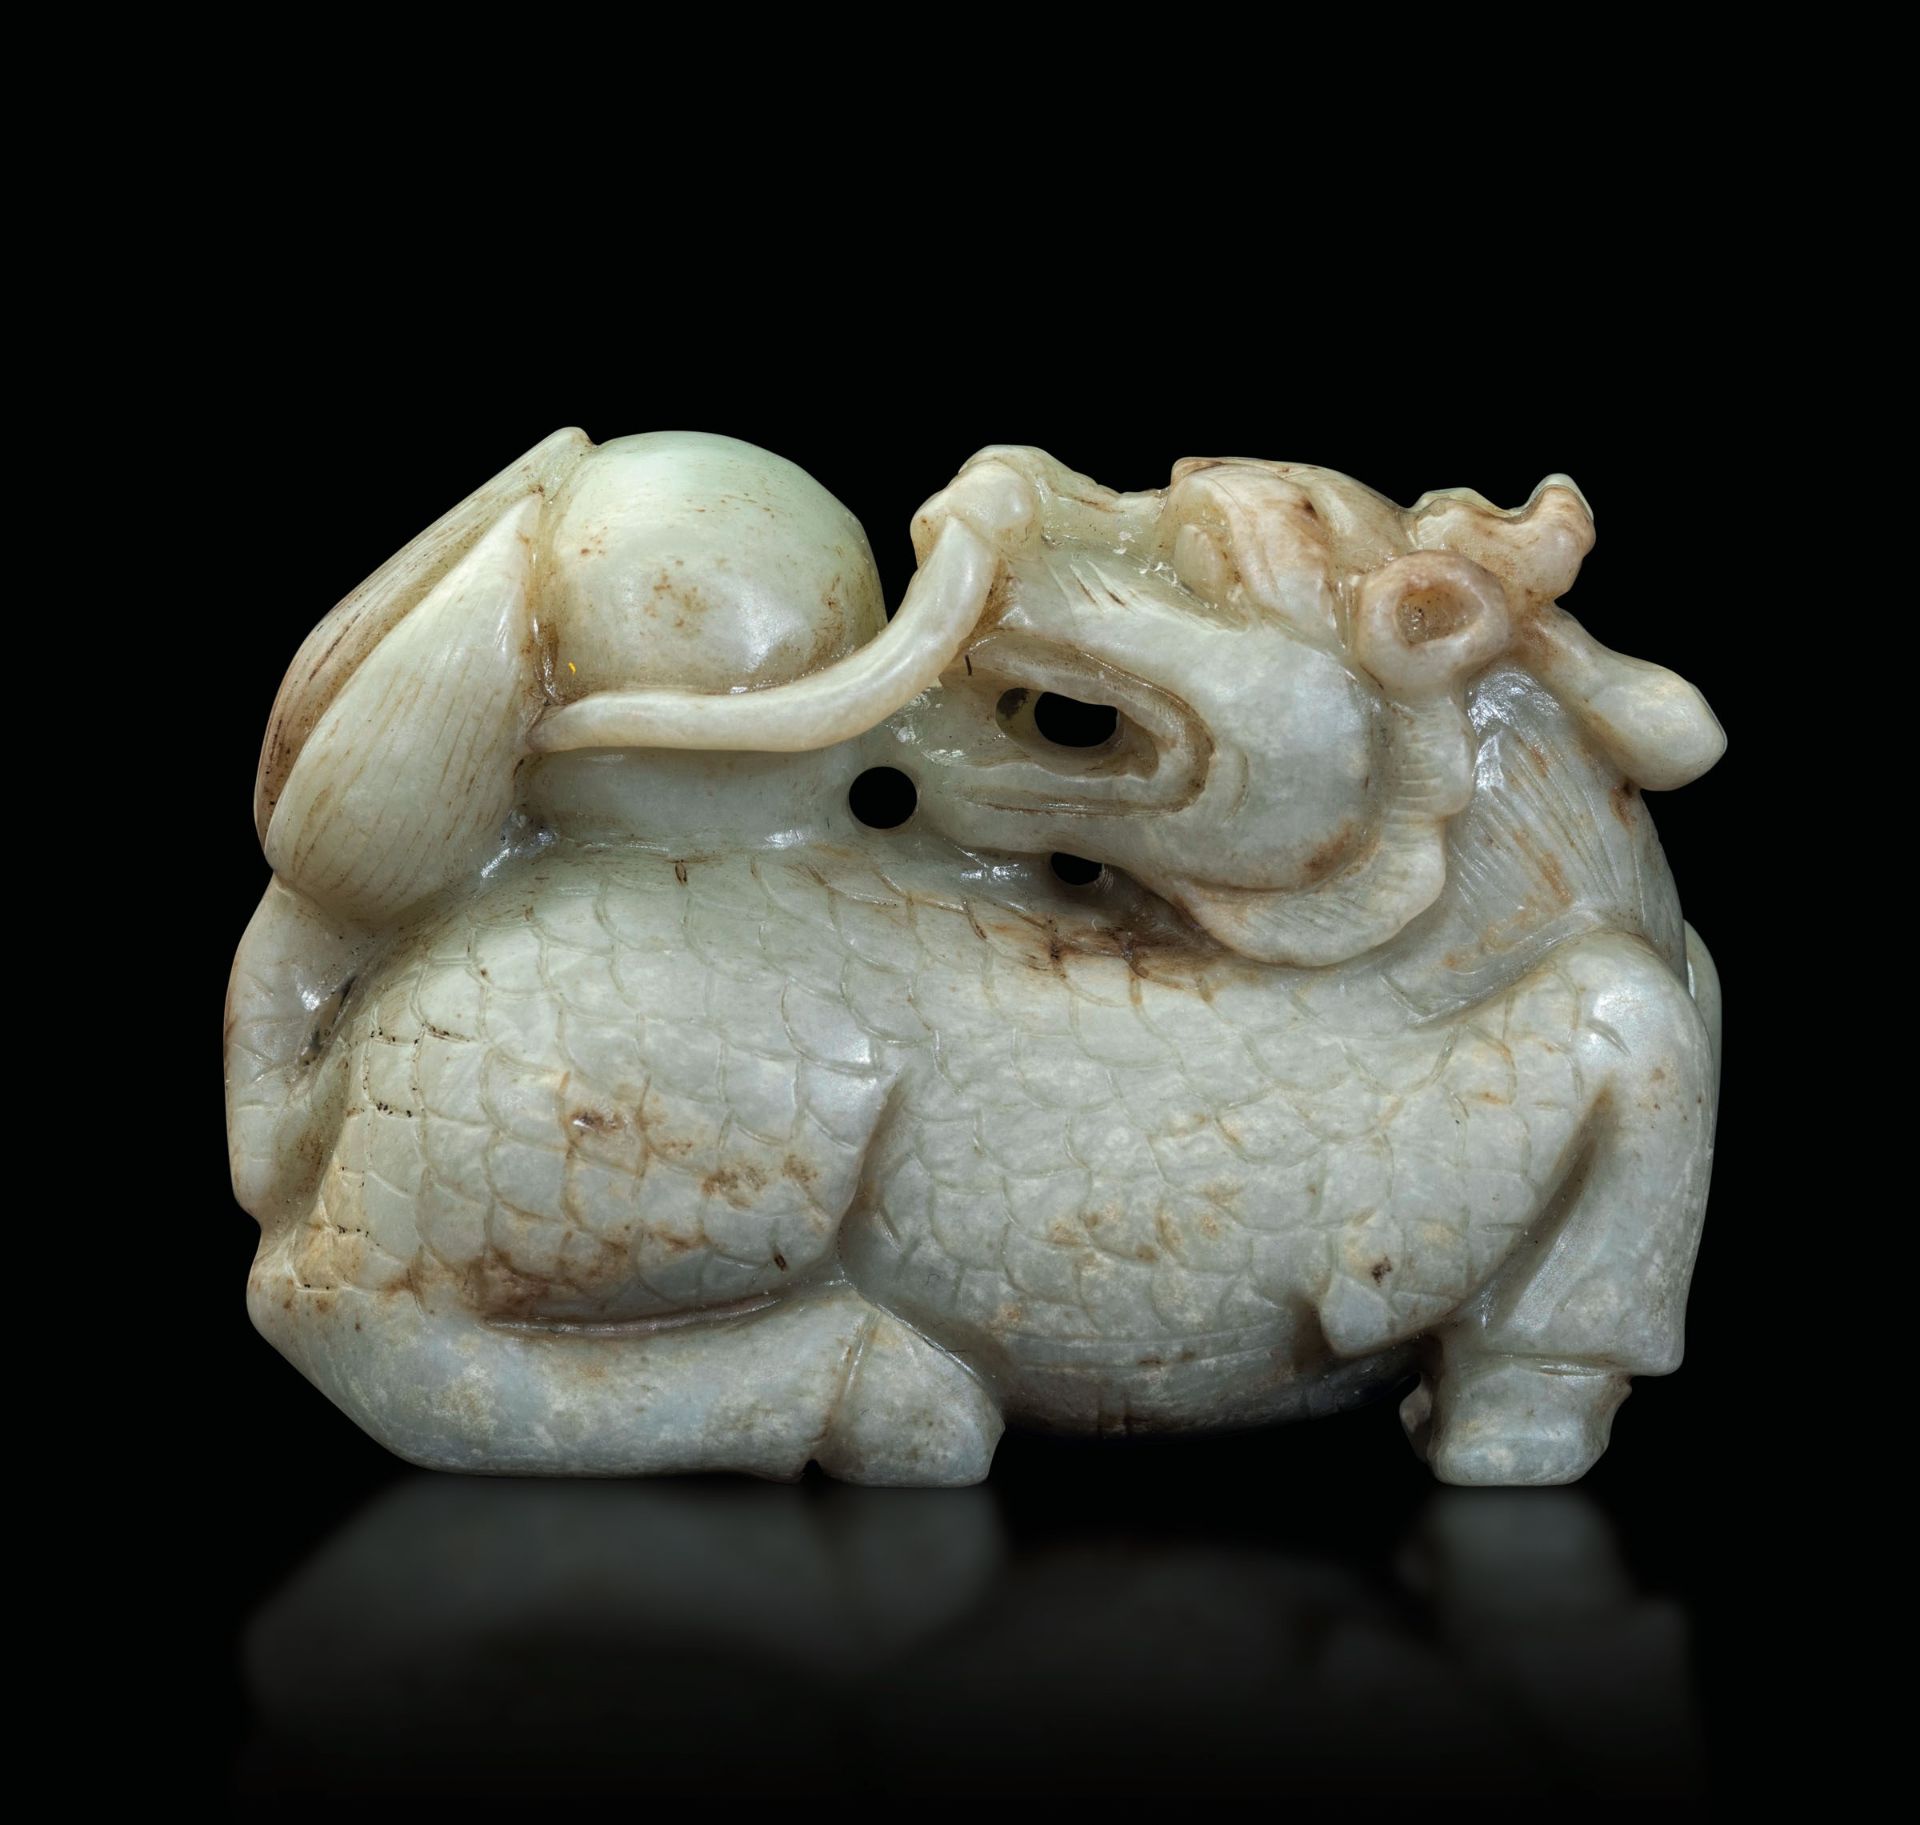 A jade and russet dragon, China, 20th century - 4.5x6.5cm -